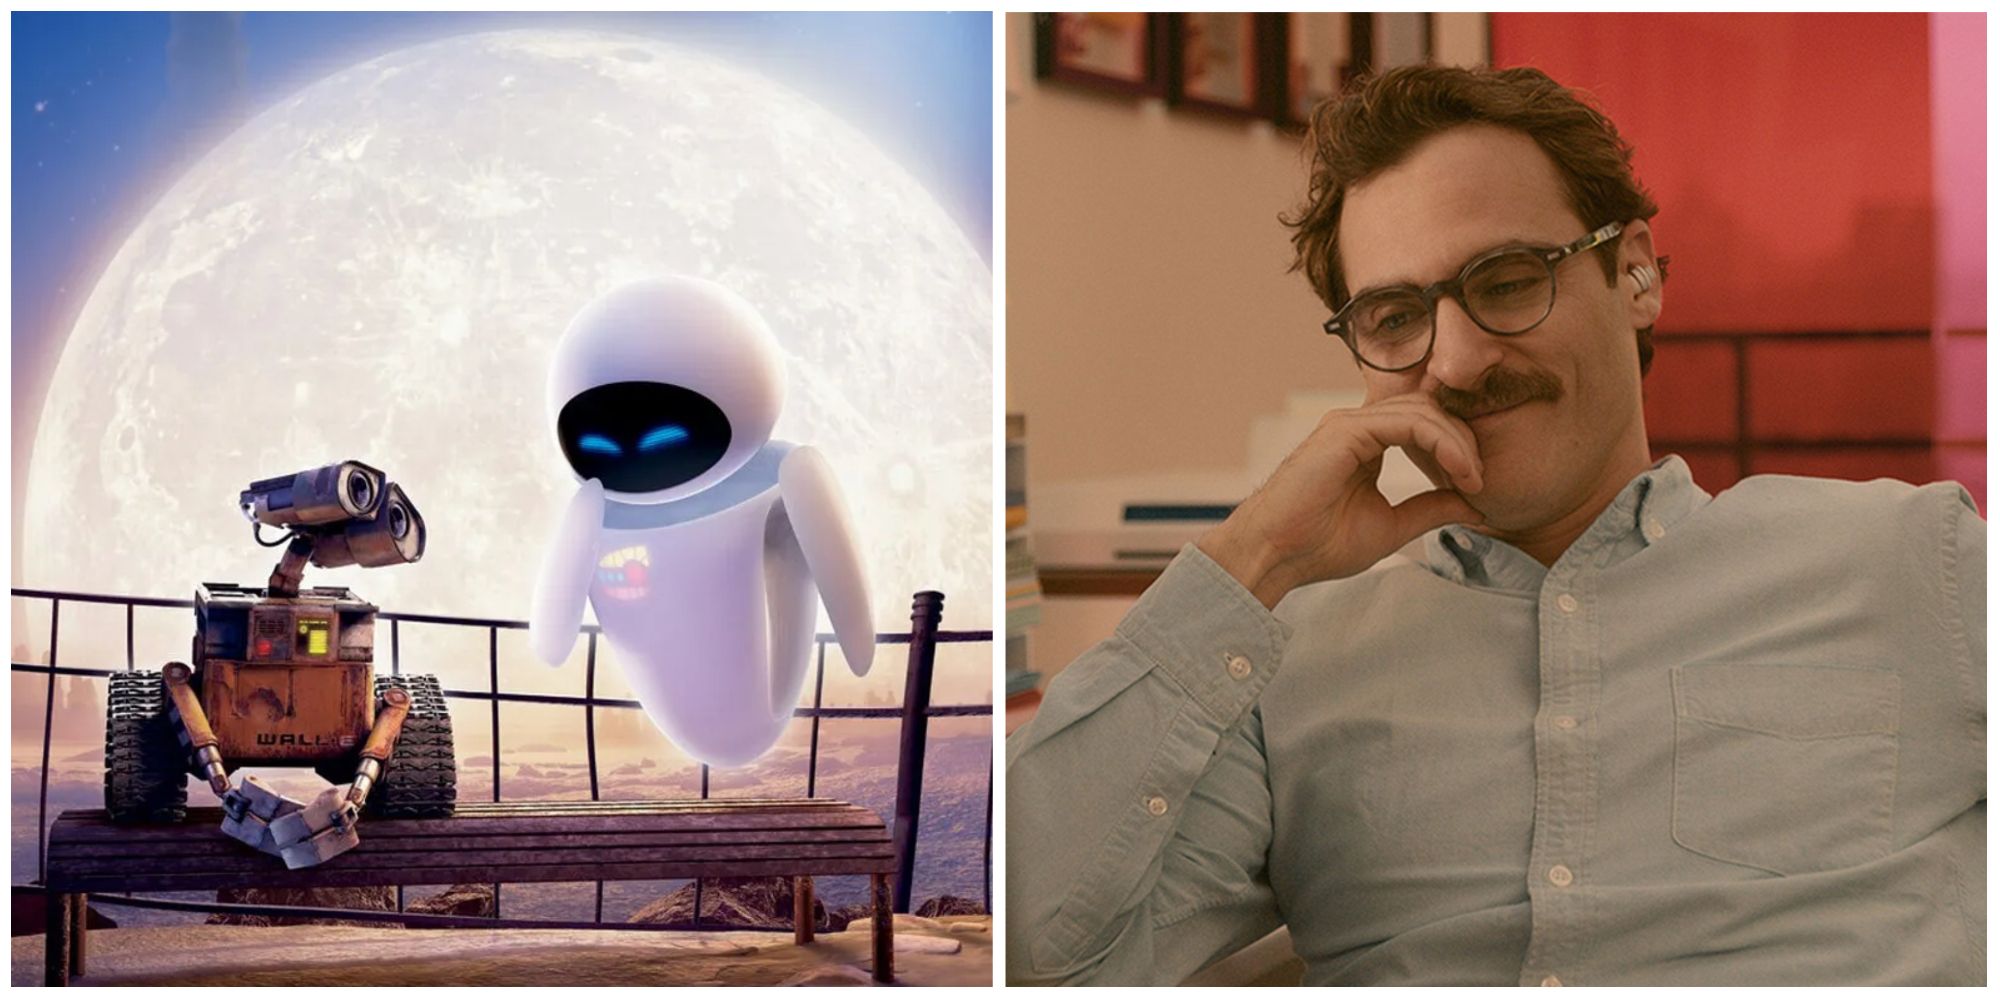 Wall-E and Eve in Wall-E and Joaquin Phoenix in Her